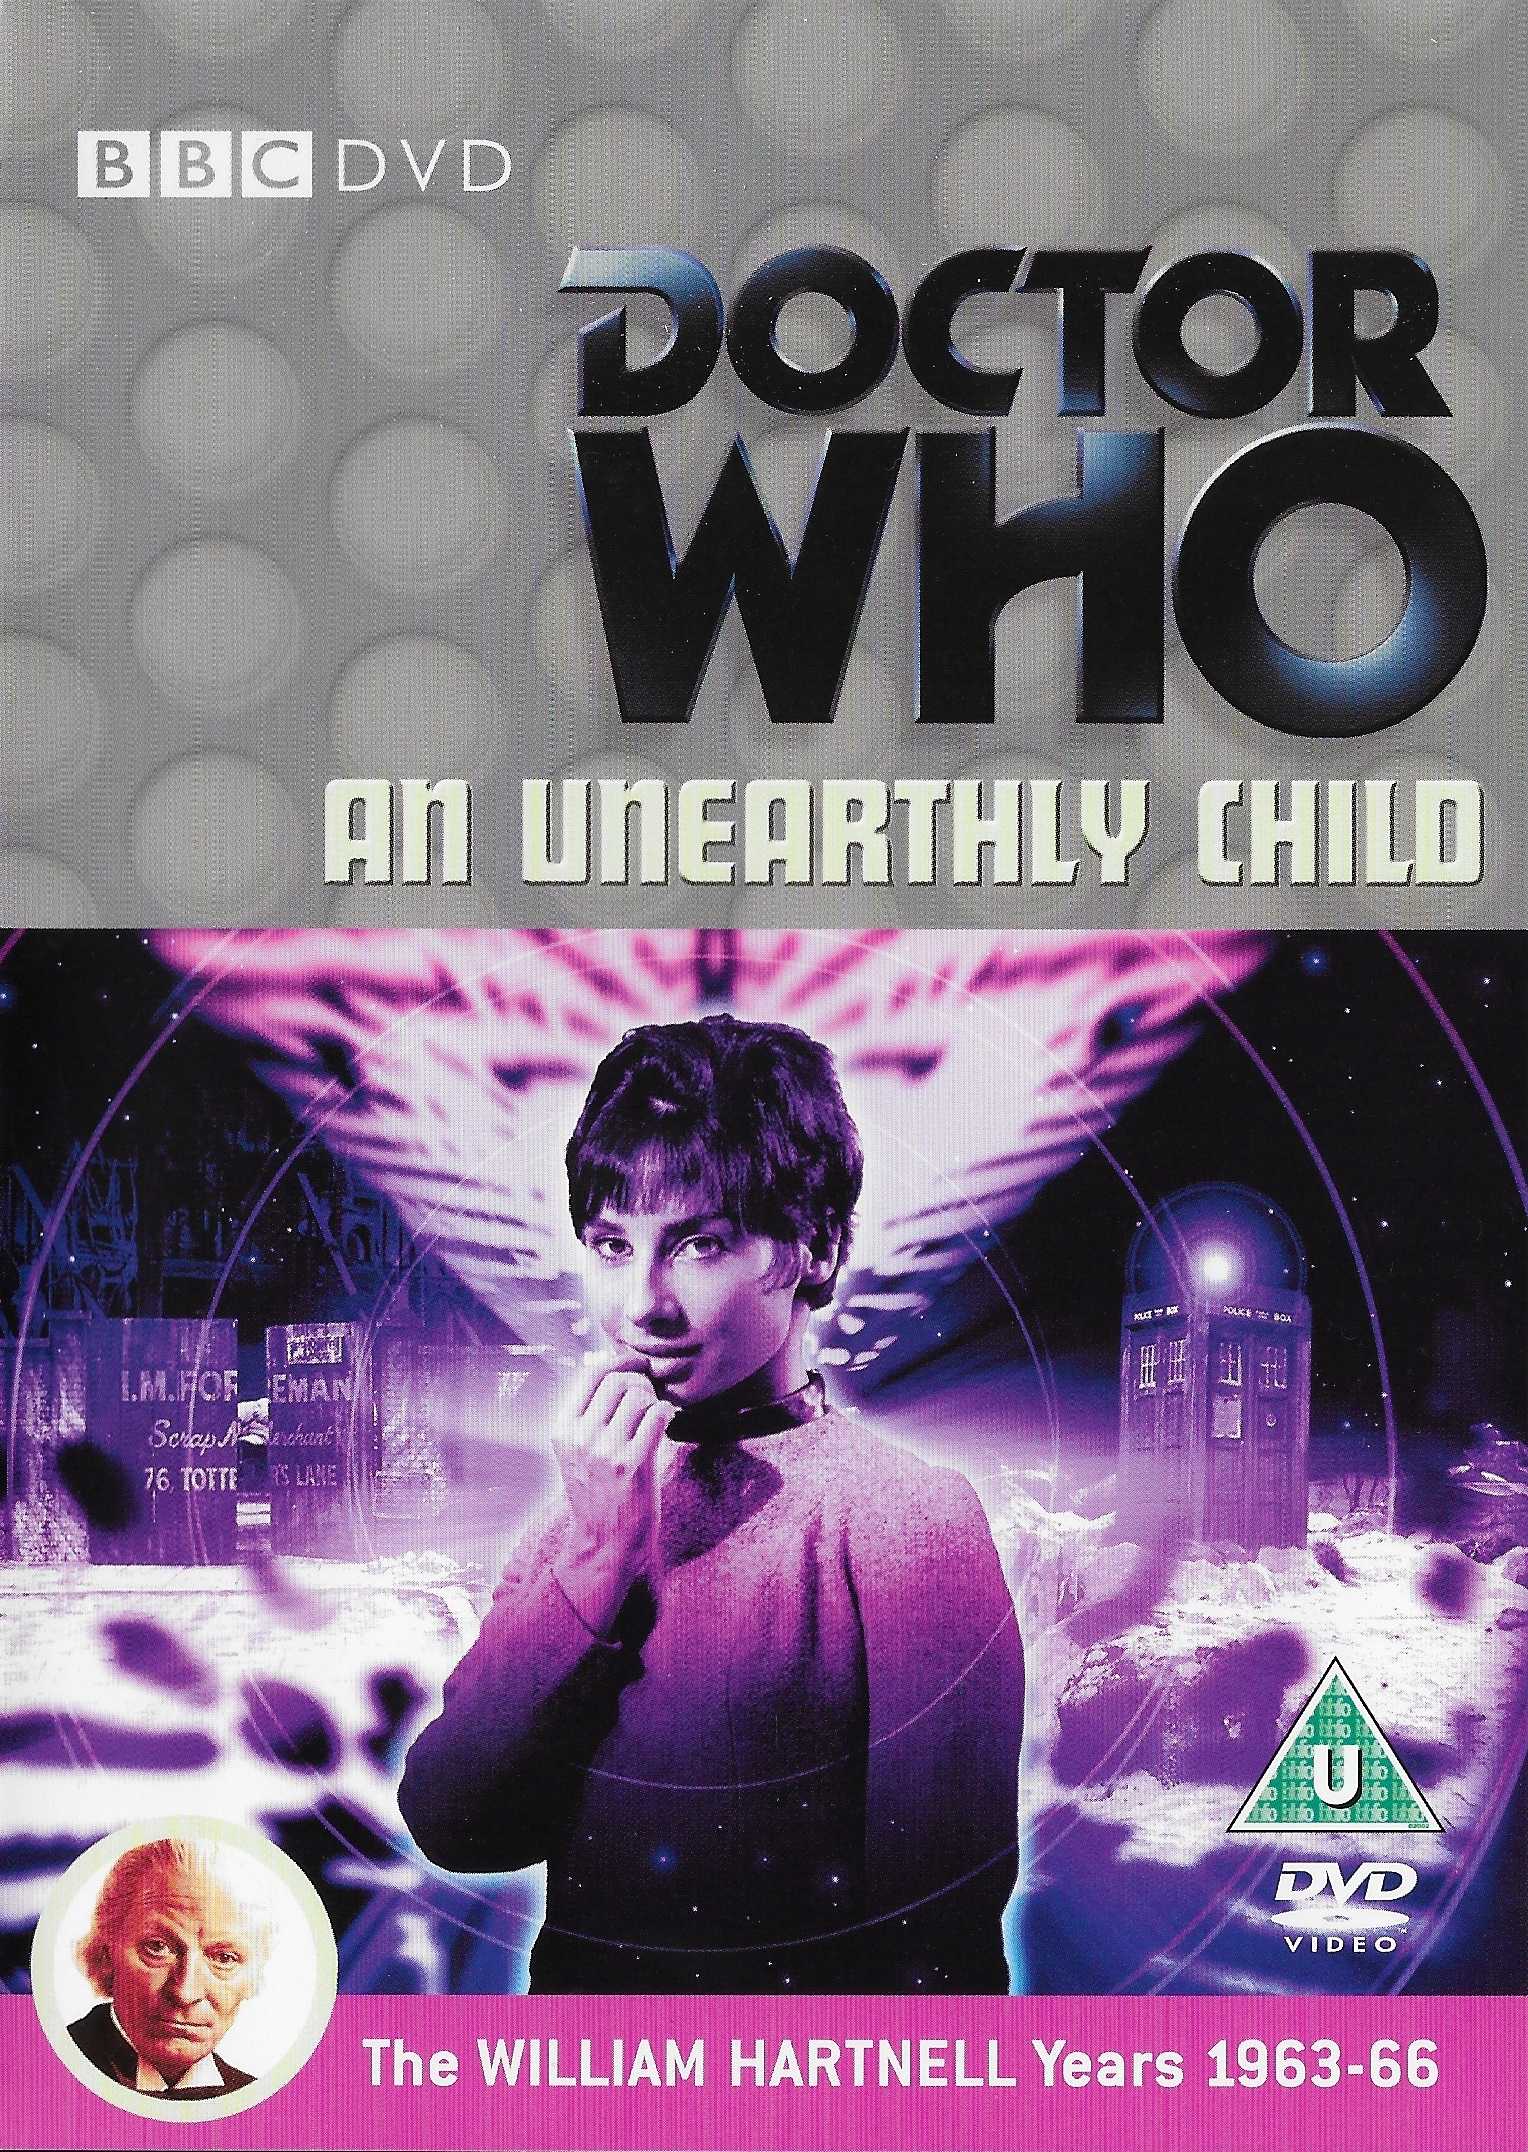 Picture of BBCDVD 1882A Doctor Who - An unearthly child by artist Anthony Coburn from the BBC records and Tapes library